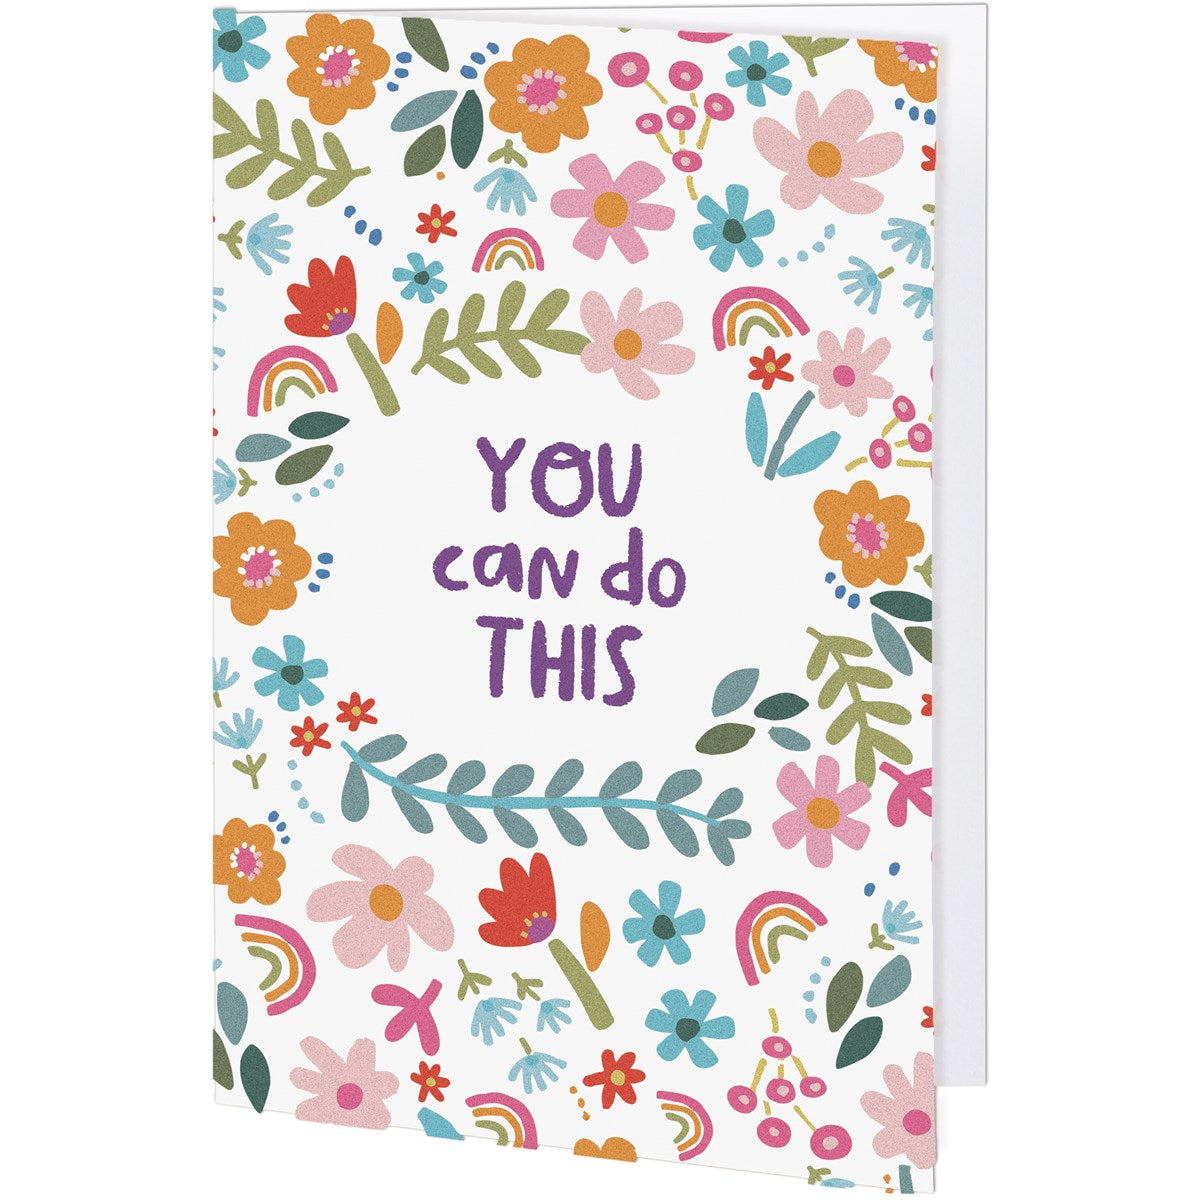 You Can Greeting Card